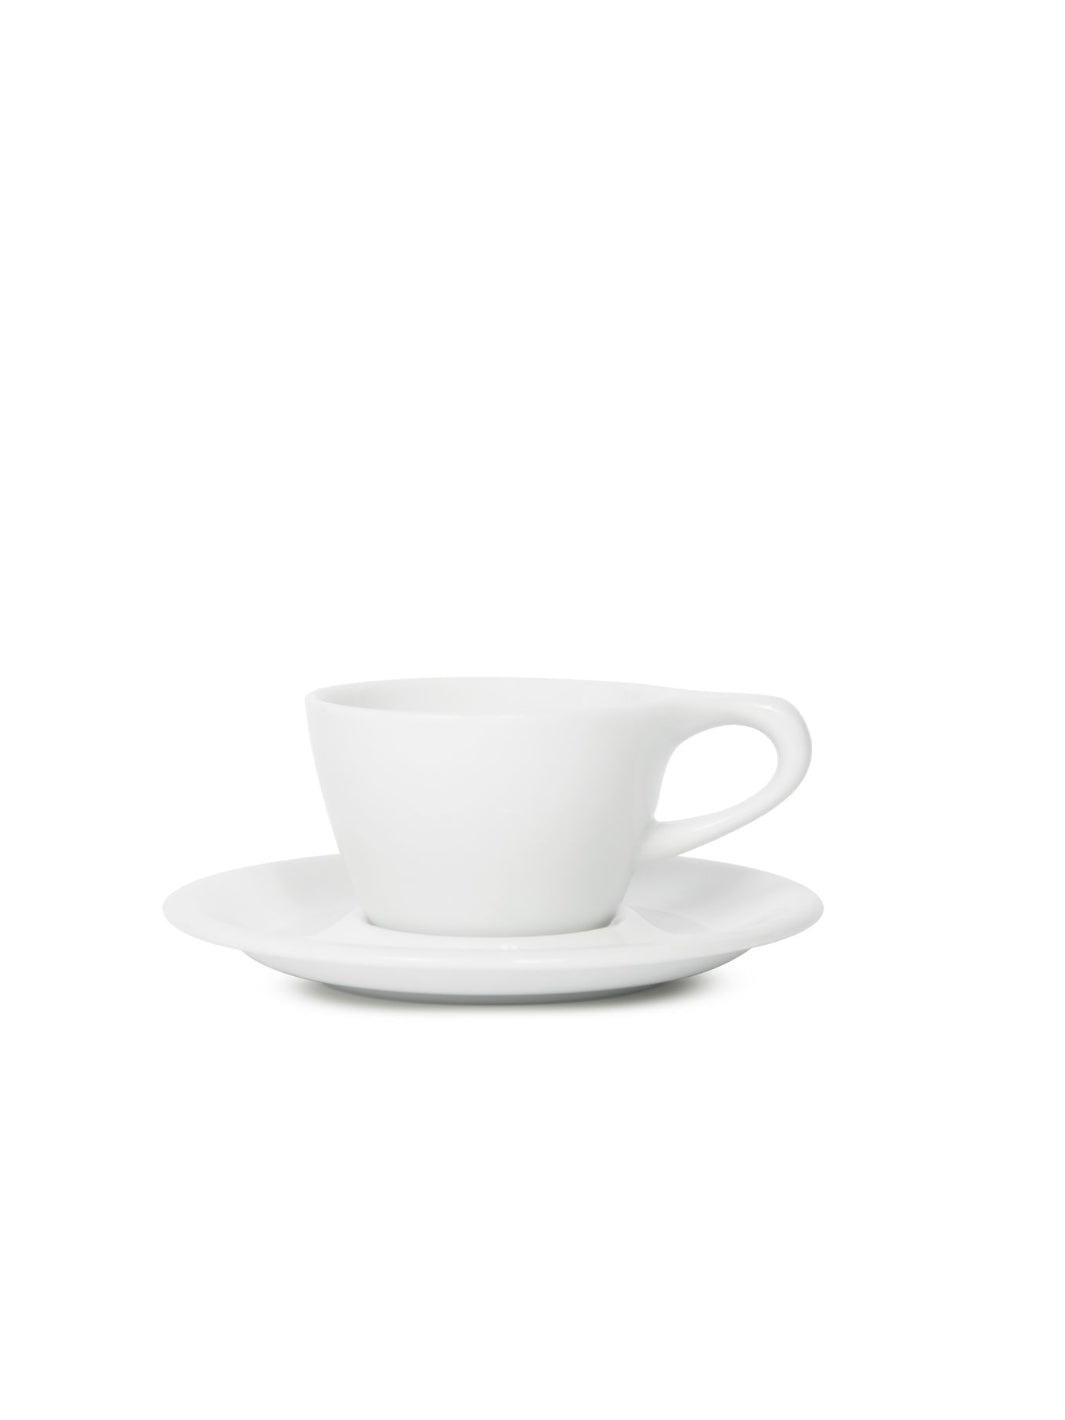 5oz Glass Espresso Cups - household items - by owner - housewares